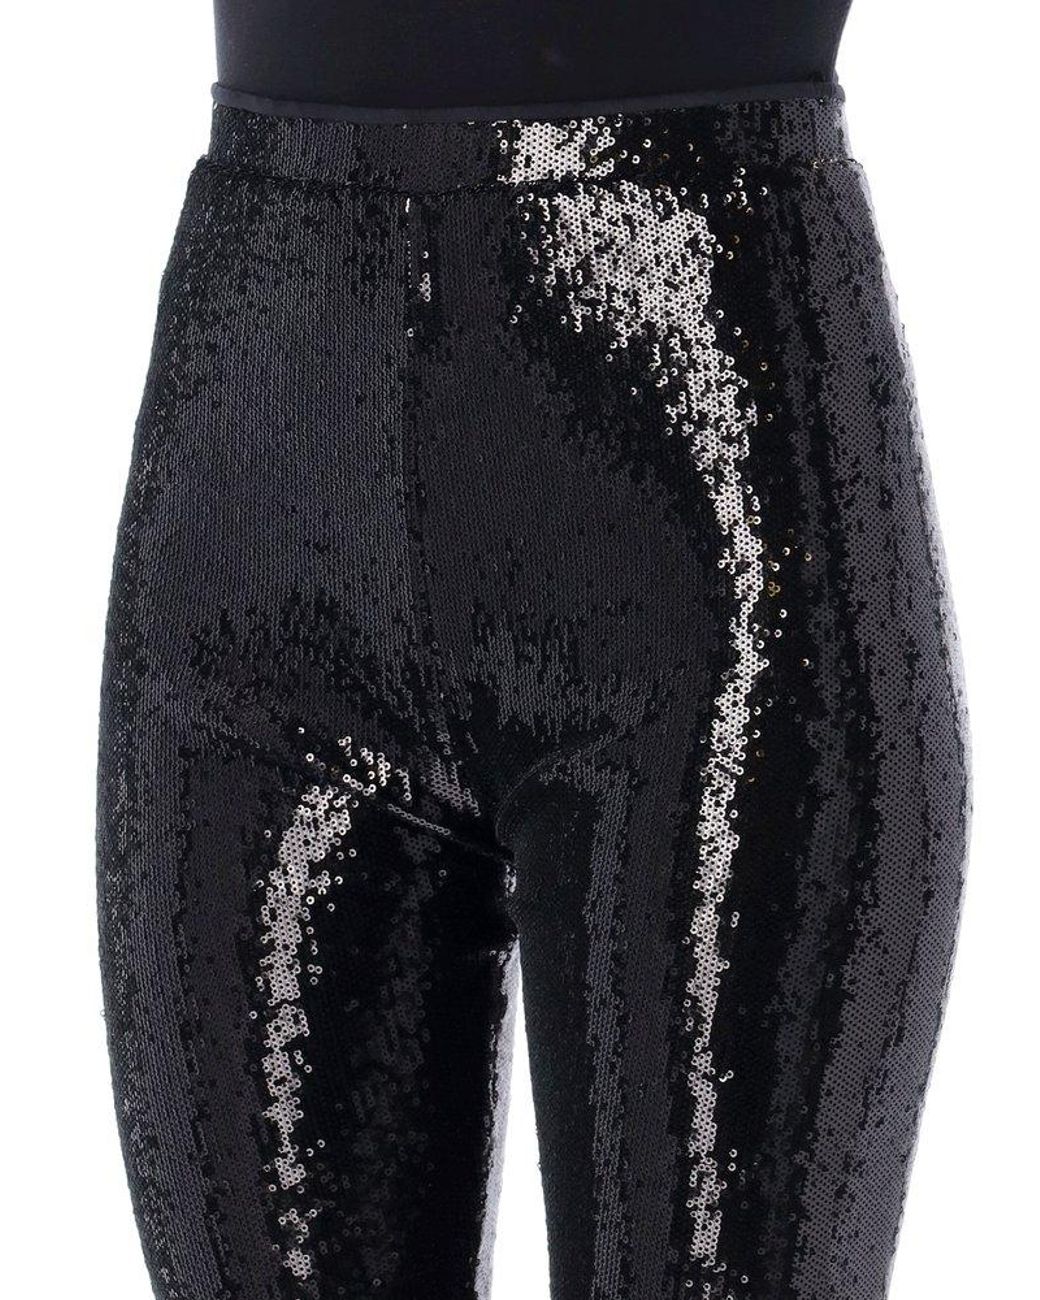 Buy Glam and Gloria Women's Black Sequin Sparkling Glitter Shiny Skinny  Pants Leggings Jeggings – Size Large at Amazon.in